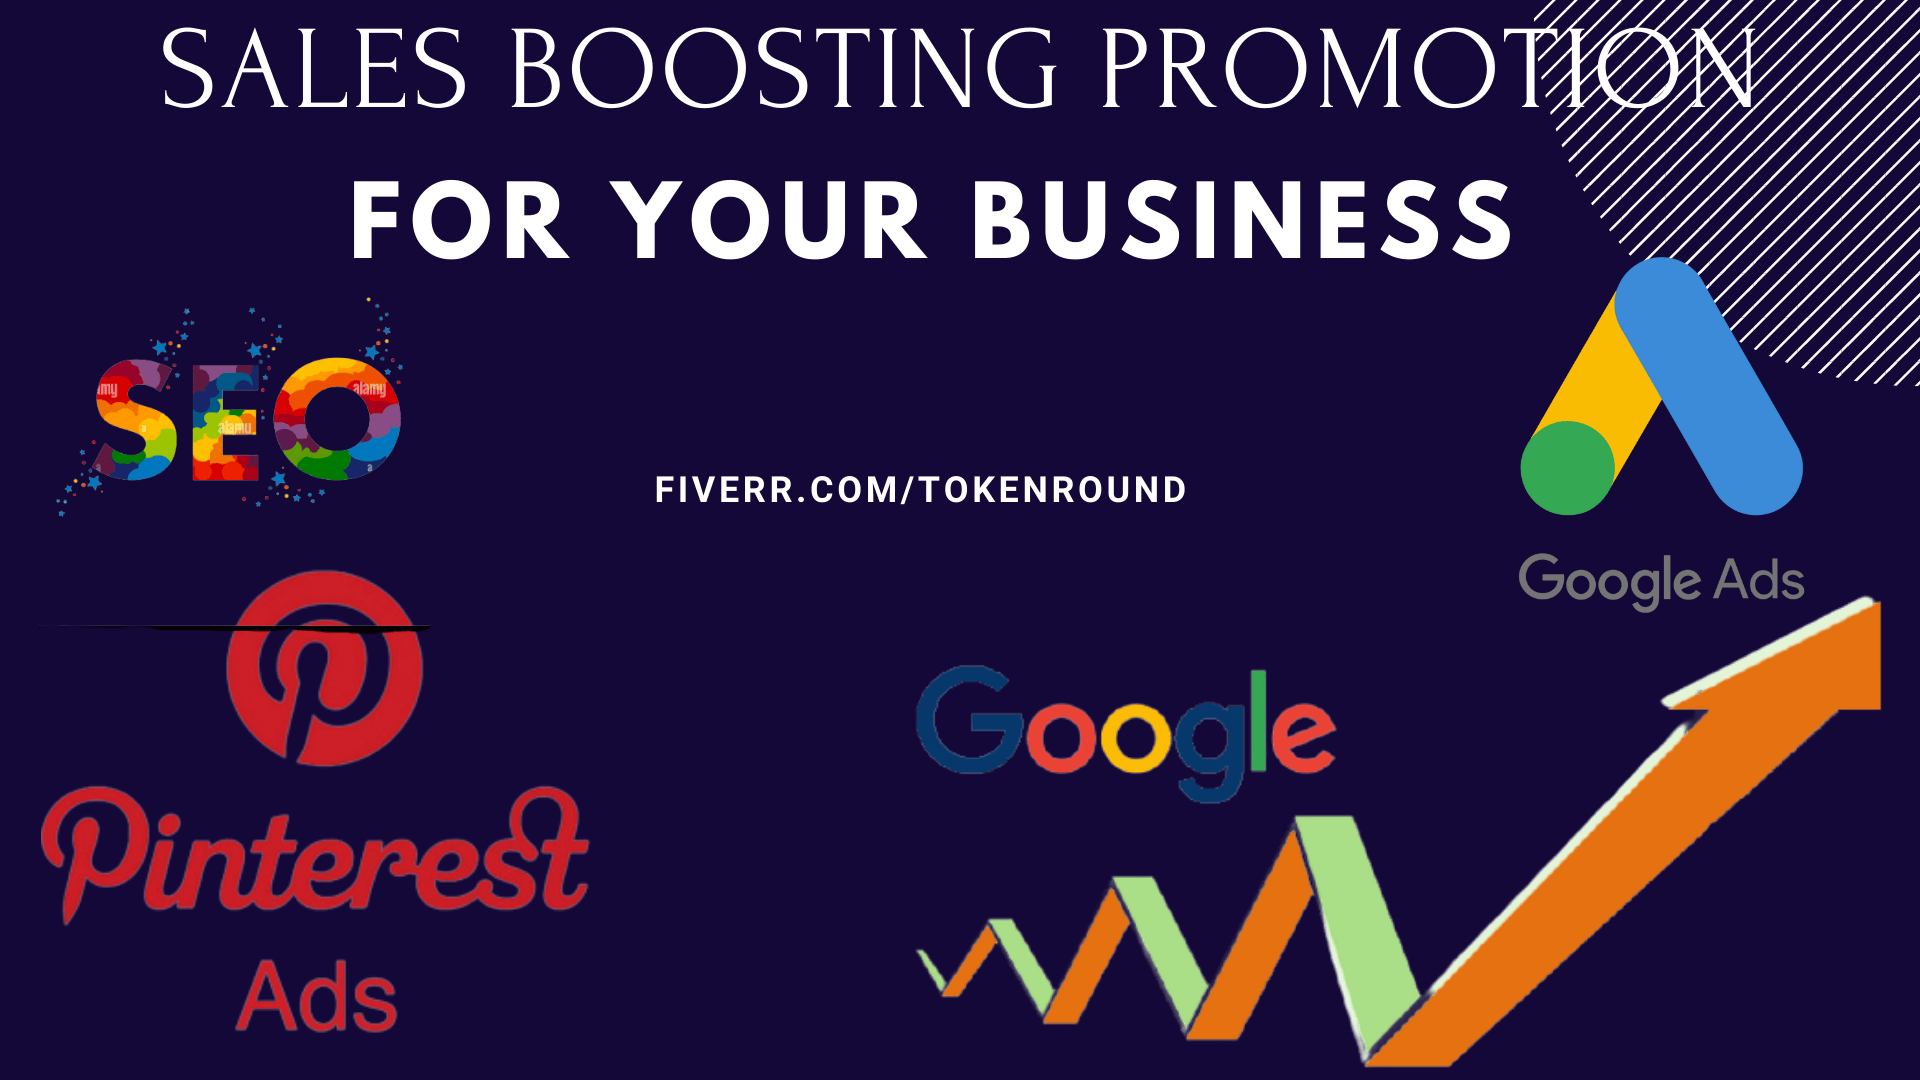 I will do sales boosting google ads, seo ranking, pinterest ads for your business, FiverrBox